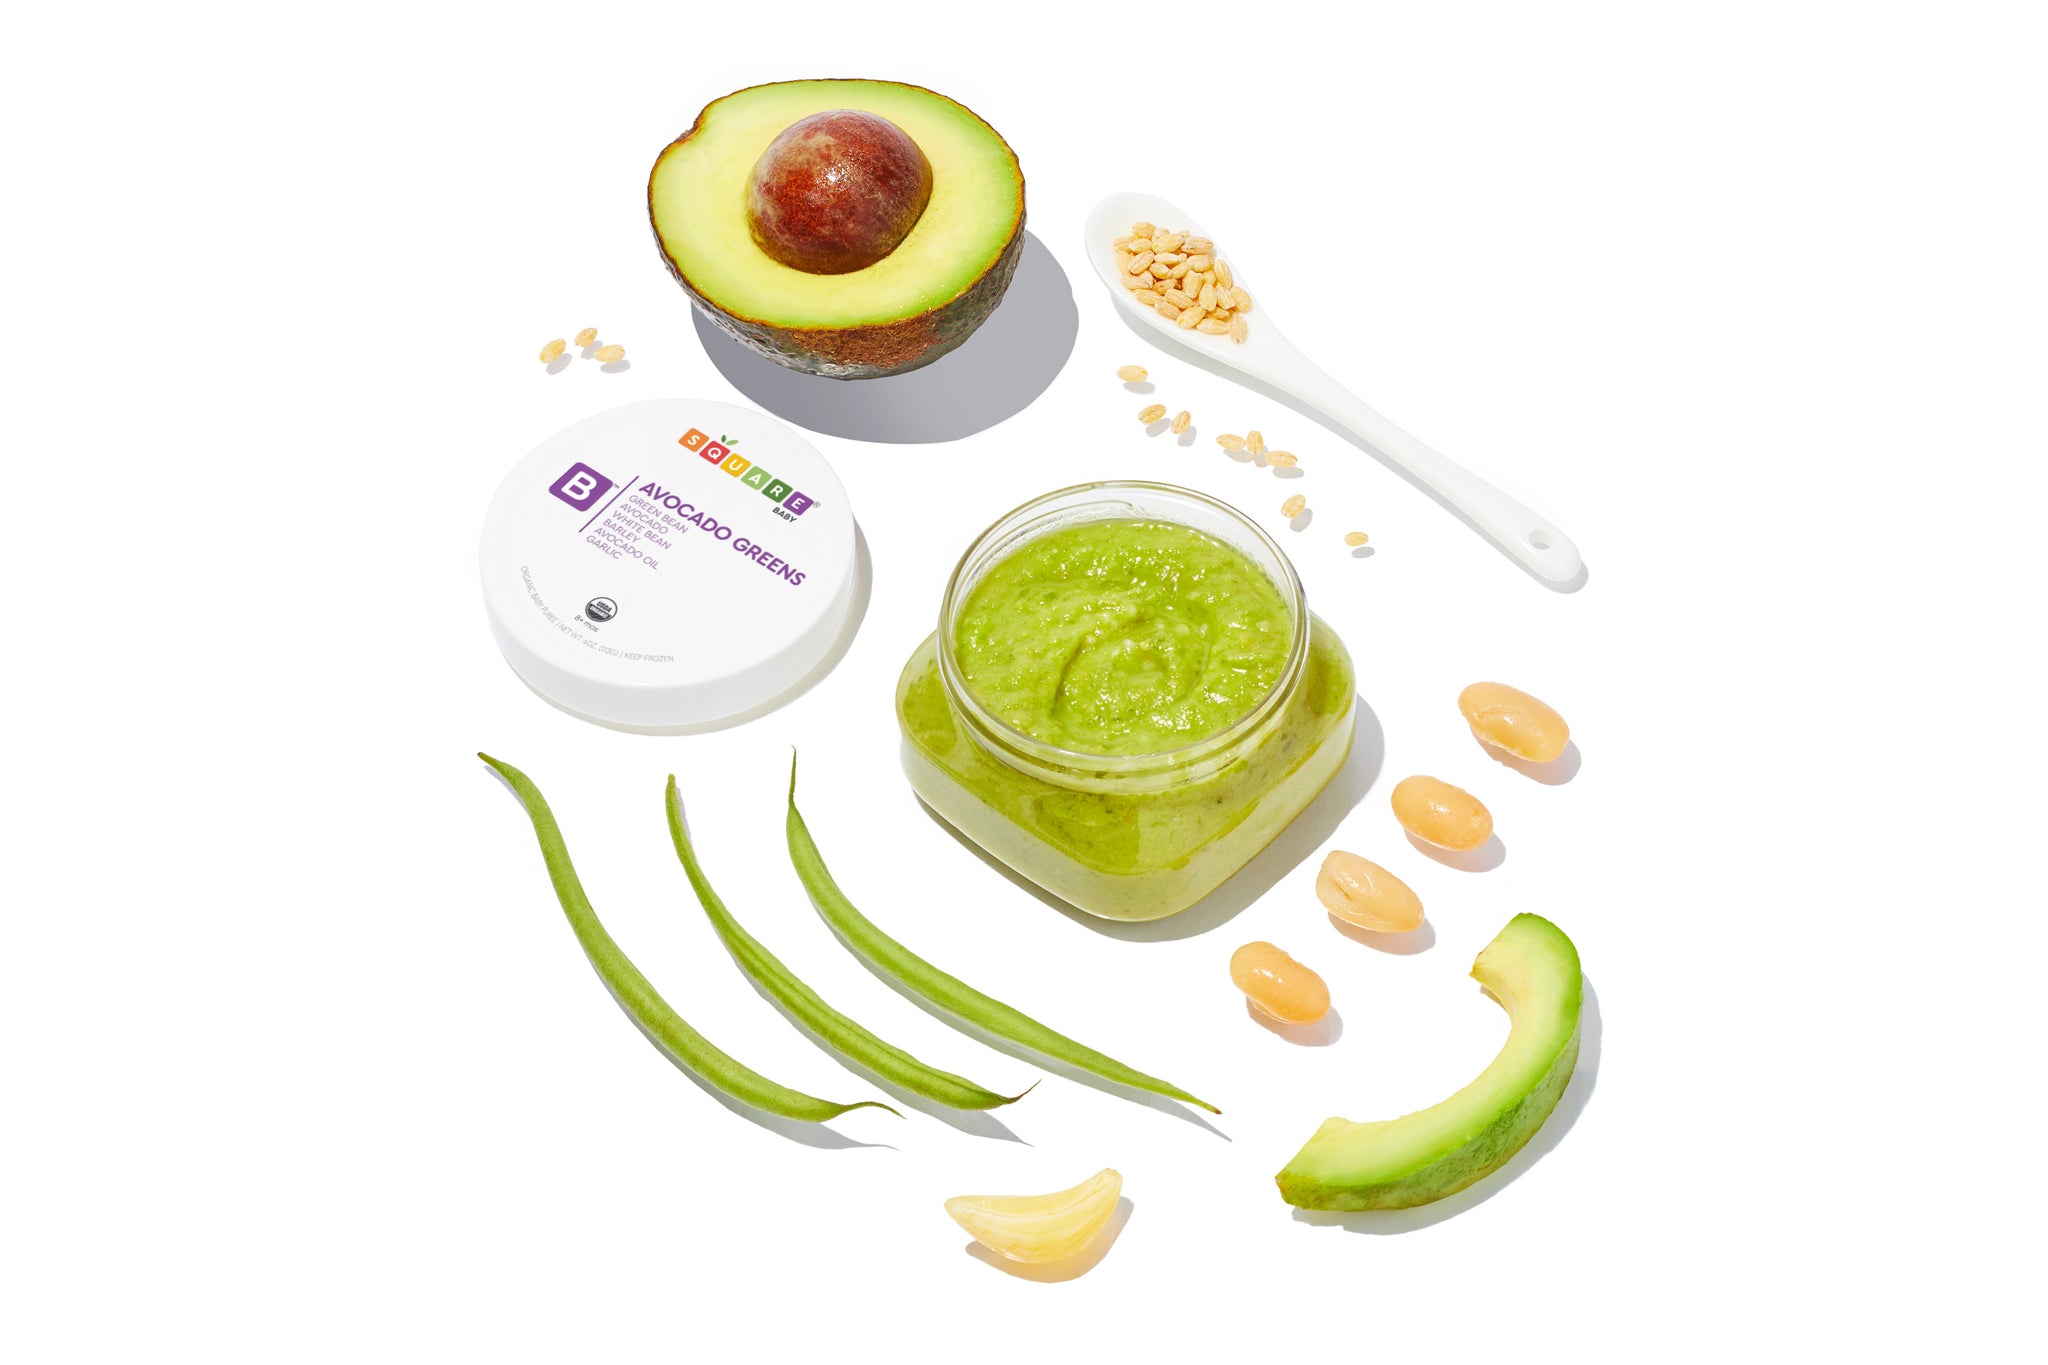 Open jar baby food with sliced fruits and veggies